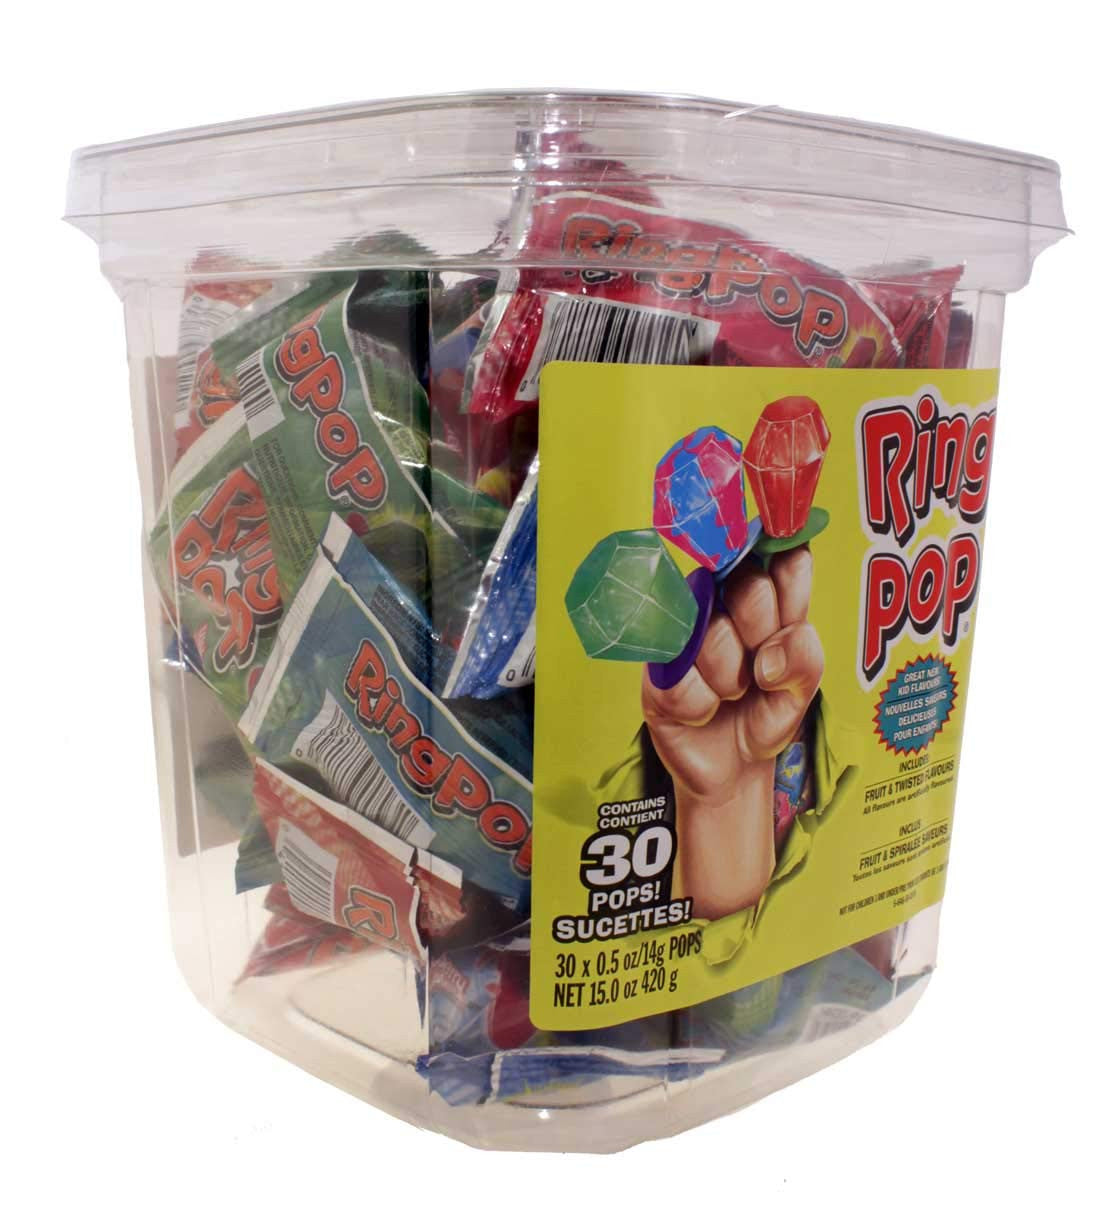 Ringpop Assorted Pops, 30 count Tub, 420g/14.8 oz., {Imported from Canada}